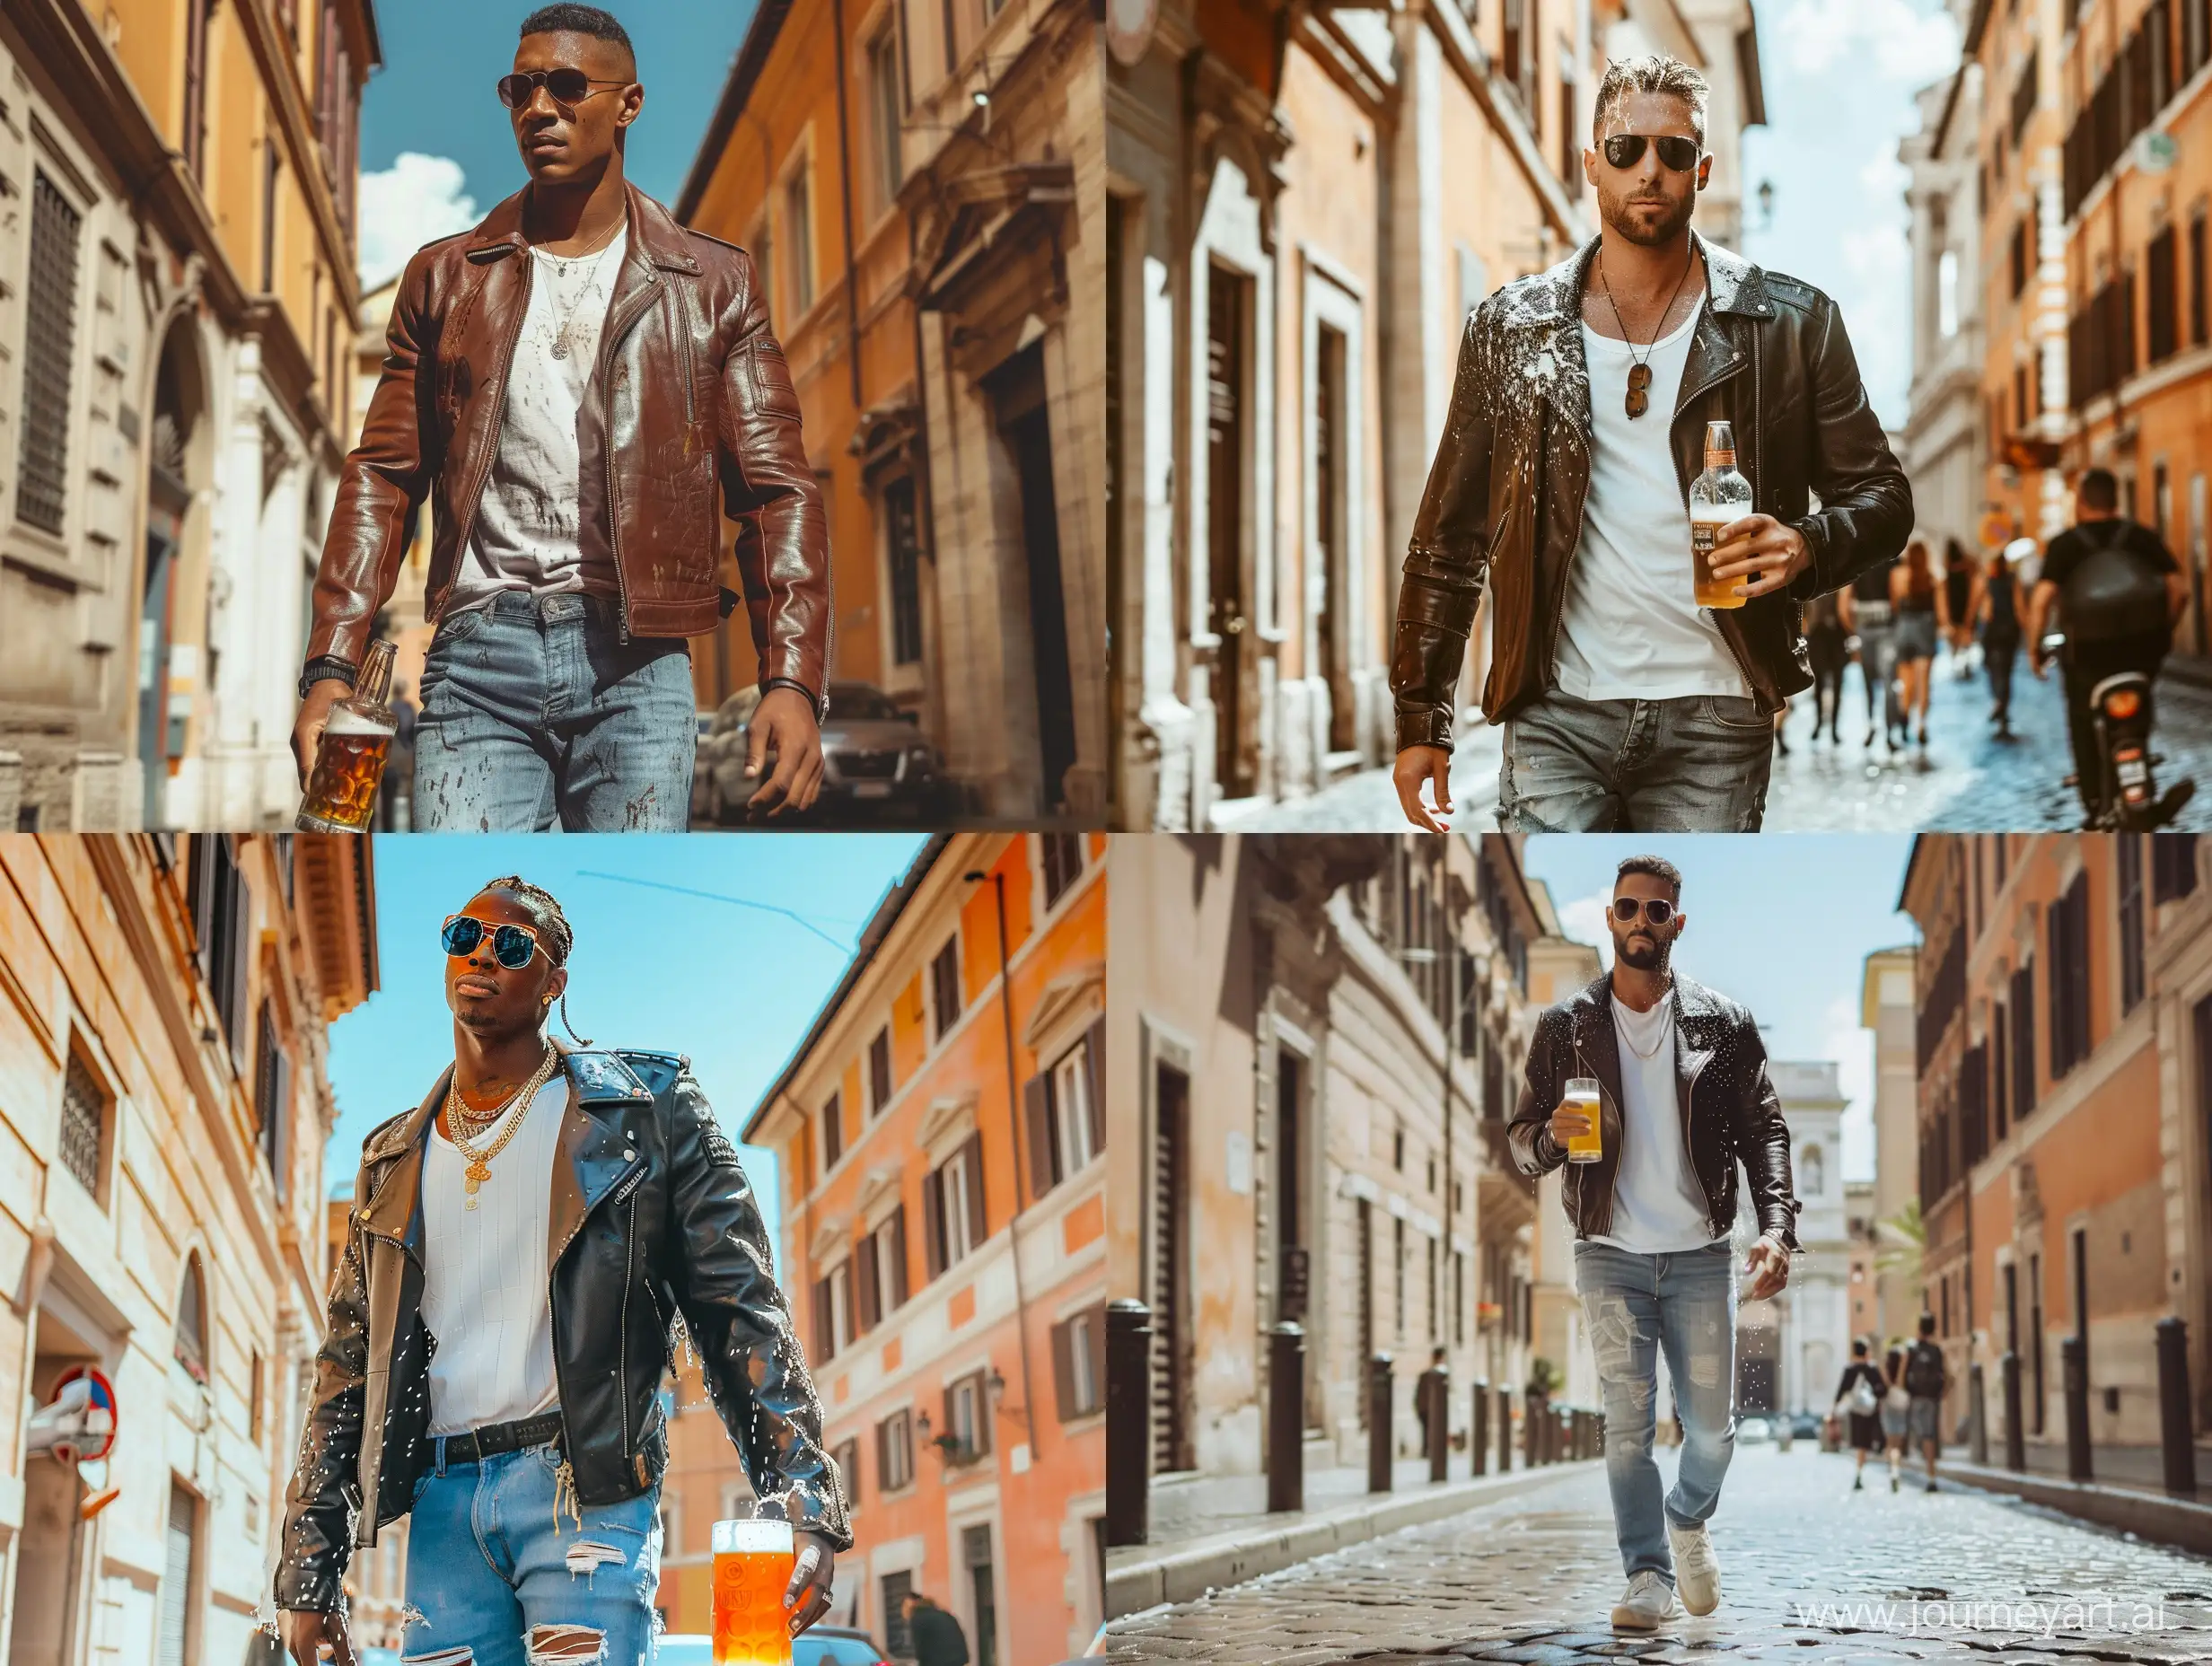 Kylian mbappe walking in rome streets with a leather jacket, jeans and sunglasses, holding a beer, dripping in a sunny day 